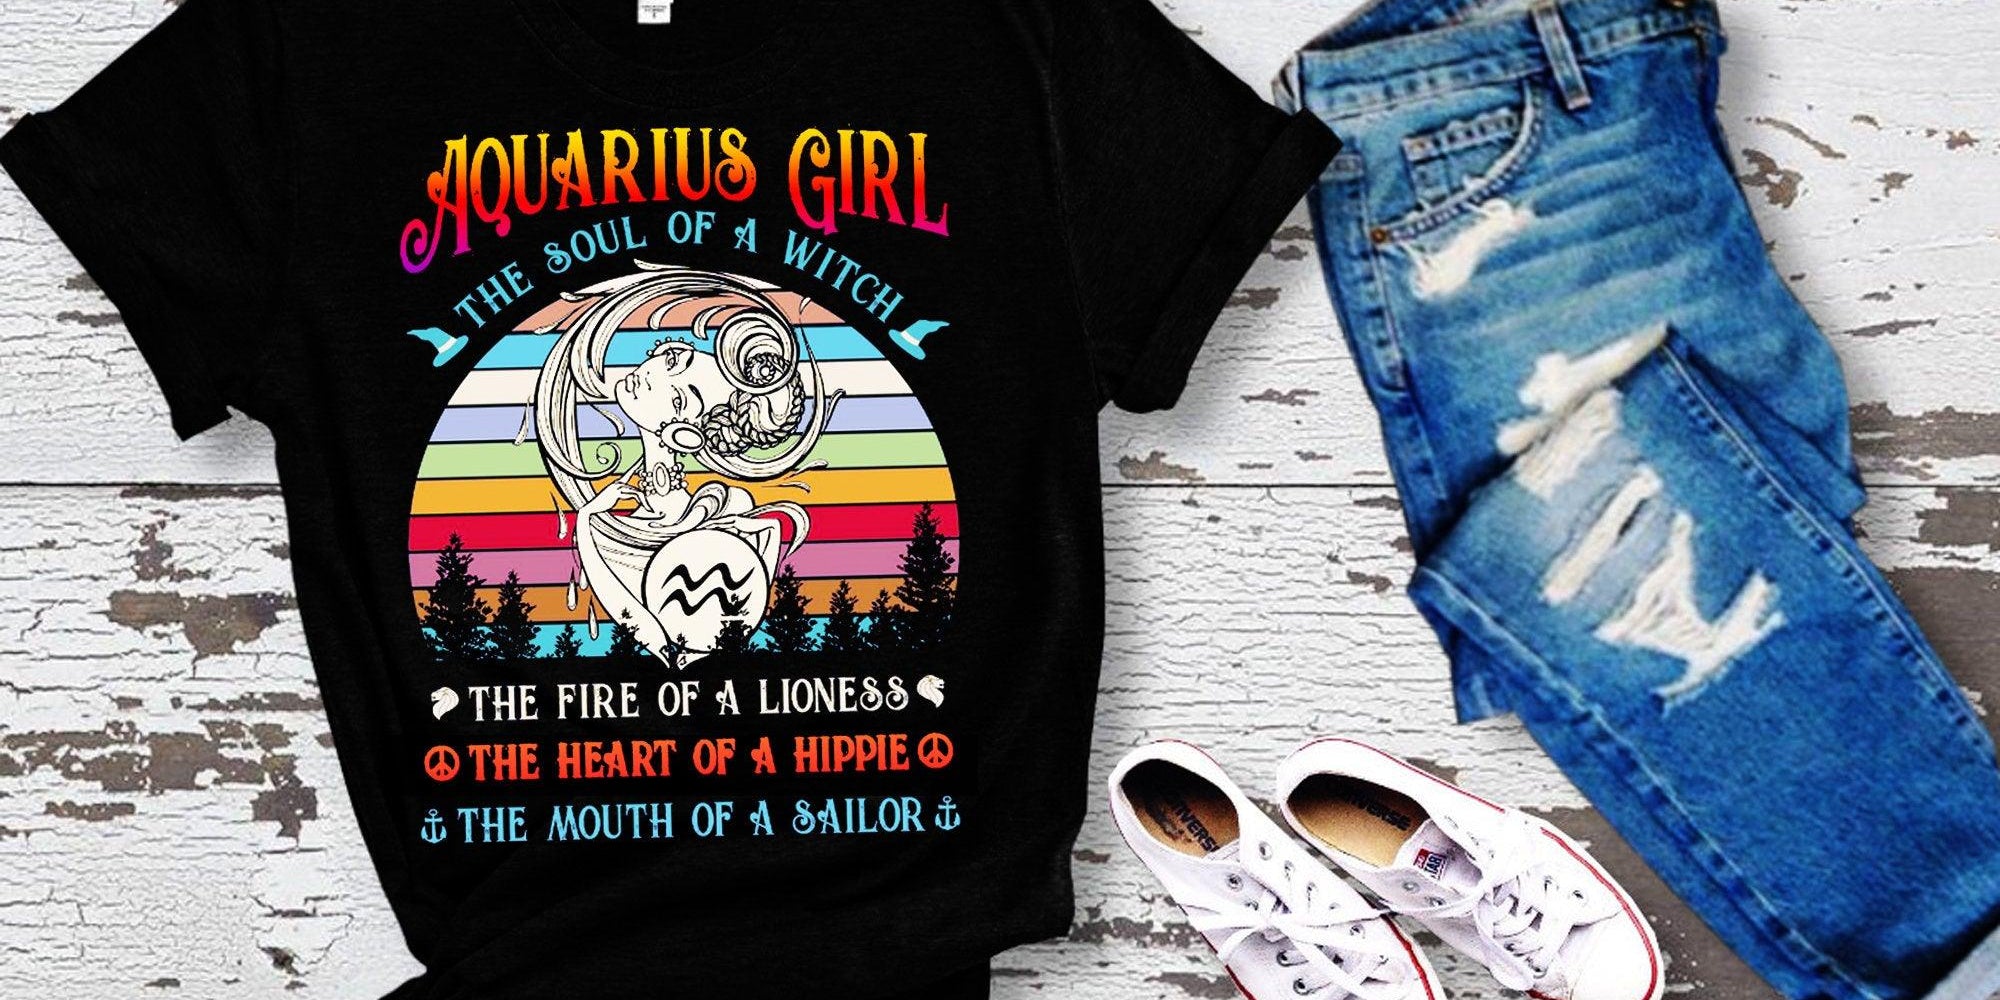 Aquarius Girl The Soul Of A Witch Awesome T-Shirts, the fire of lioness, the heart of hippie, mouth of a sailor Aquarius Girl, Aquarius quality, aquarius water sign, Aquarius Zodiac, December born, February born, January born, mouth of a sailor, the fire of lioness, the heart of hippie, The Soul Of A, Witch Awesome, Zodiac Aquarius - plusminusco.com